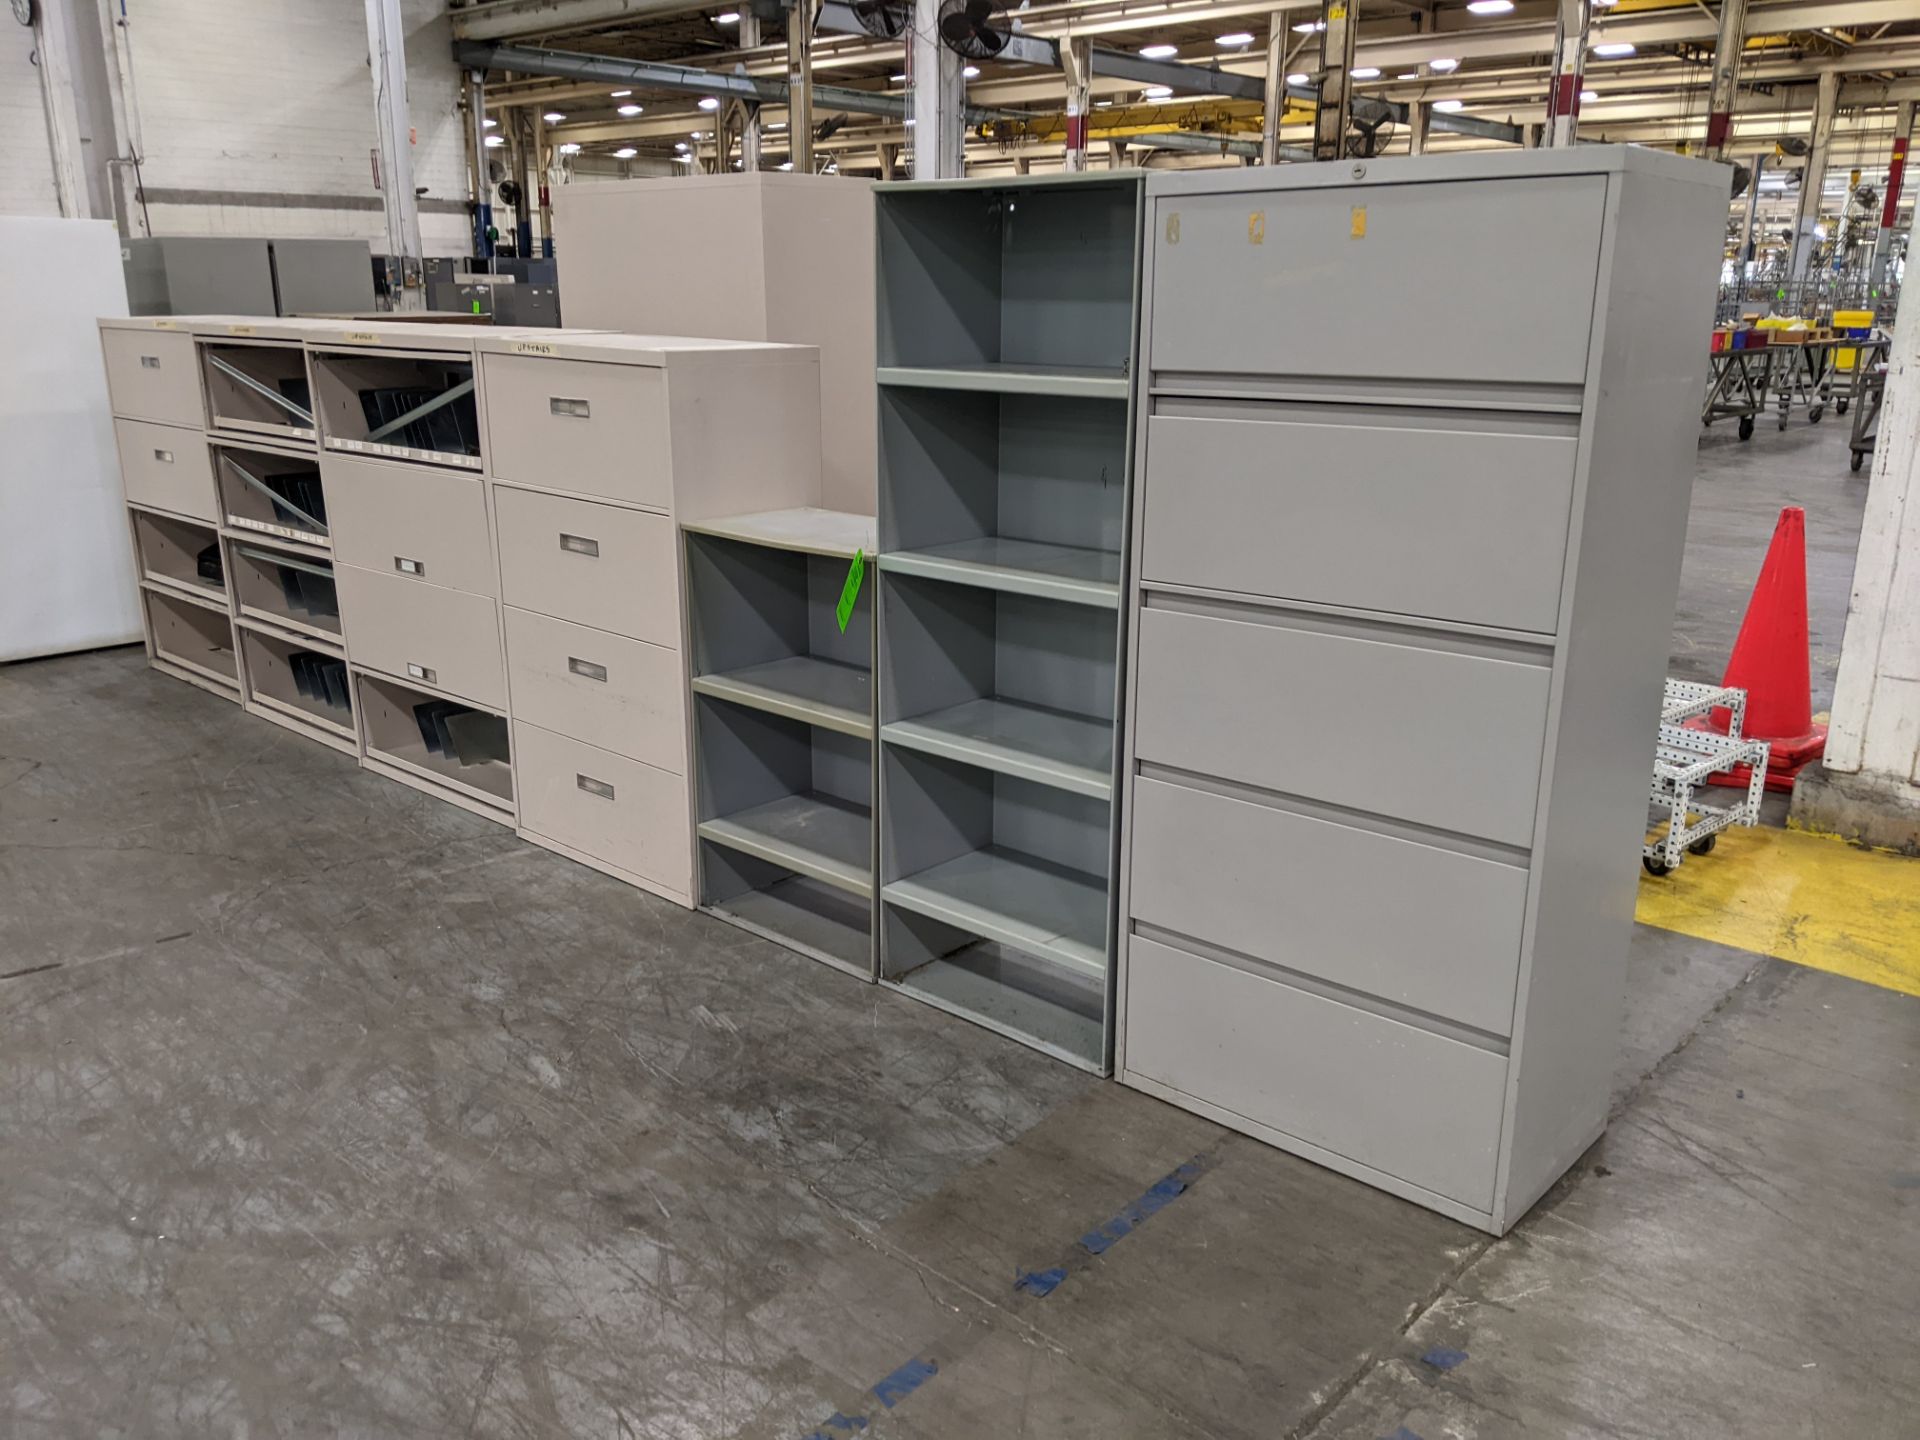 (7) VARIOUS FILING CABINETS AND SHELVES